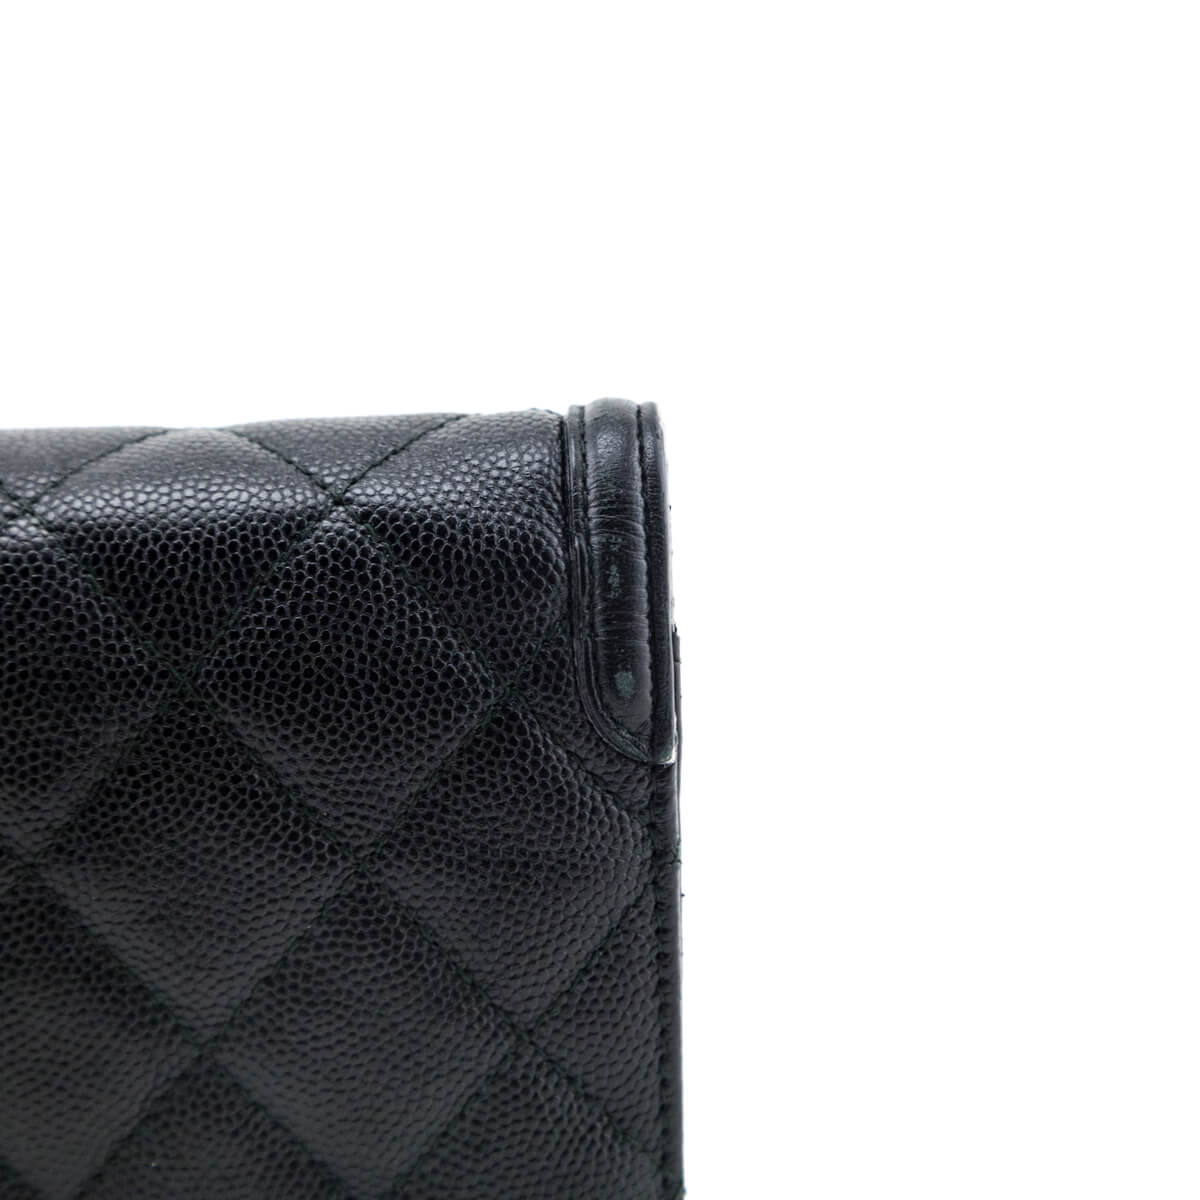 Chanel Black Quilted Caviar CC Filigree Chain Wallet - Chanel Handbags